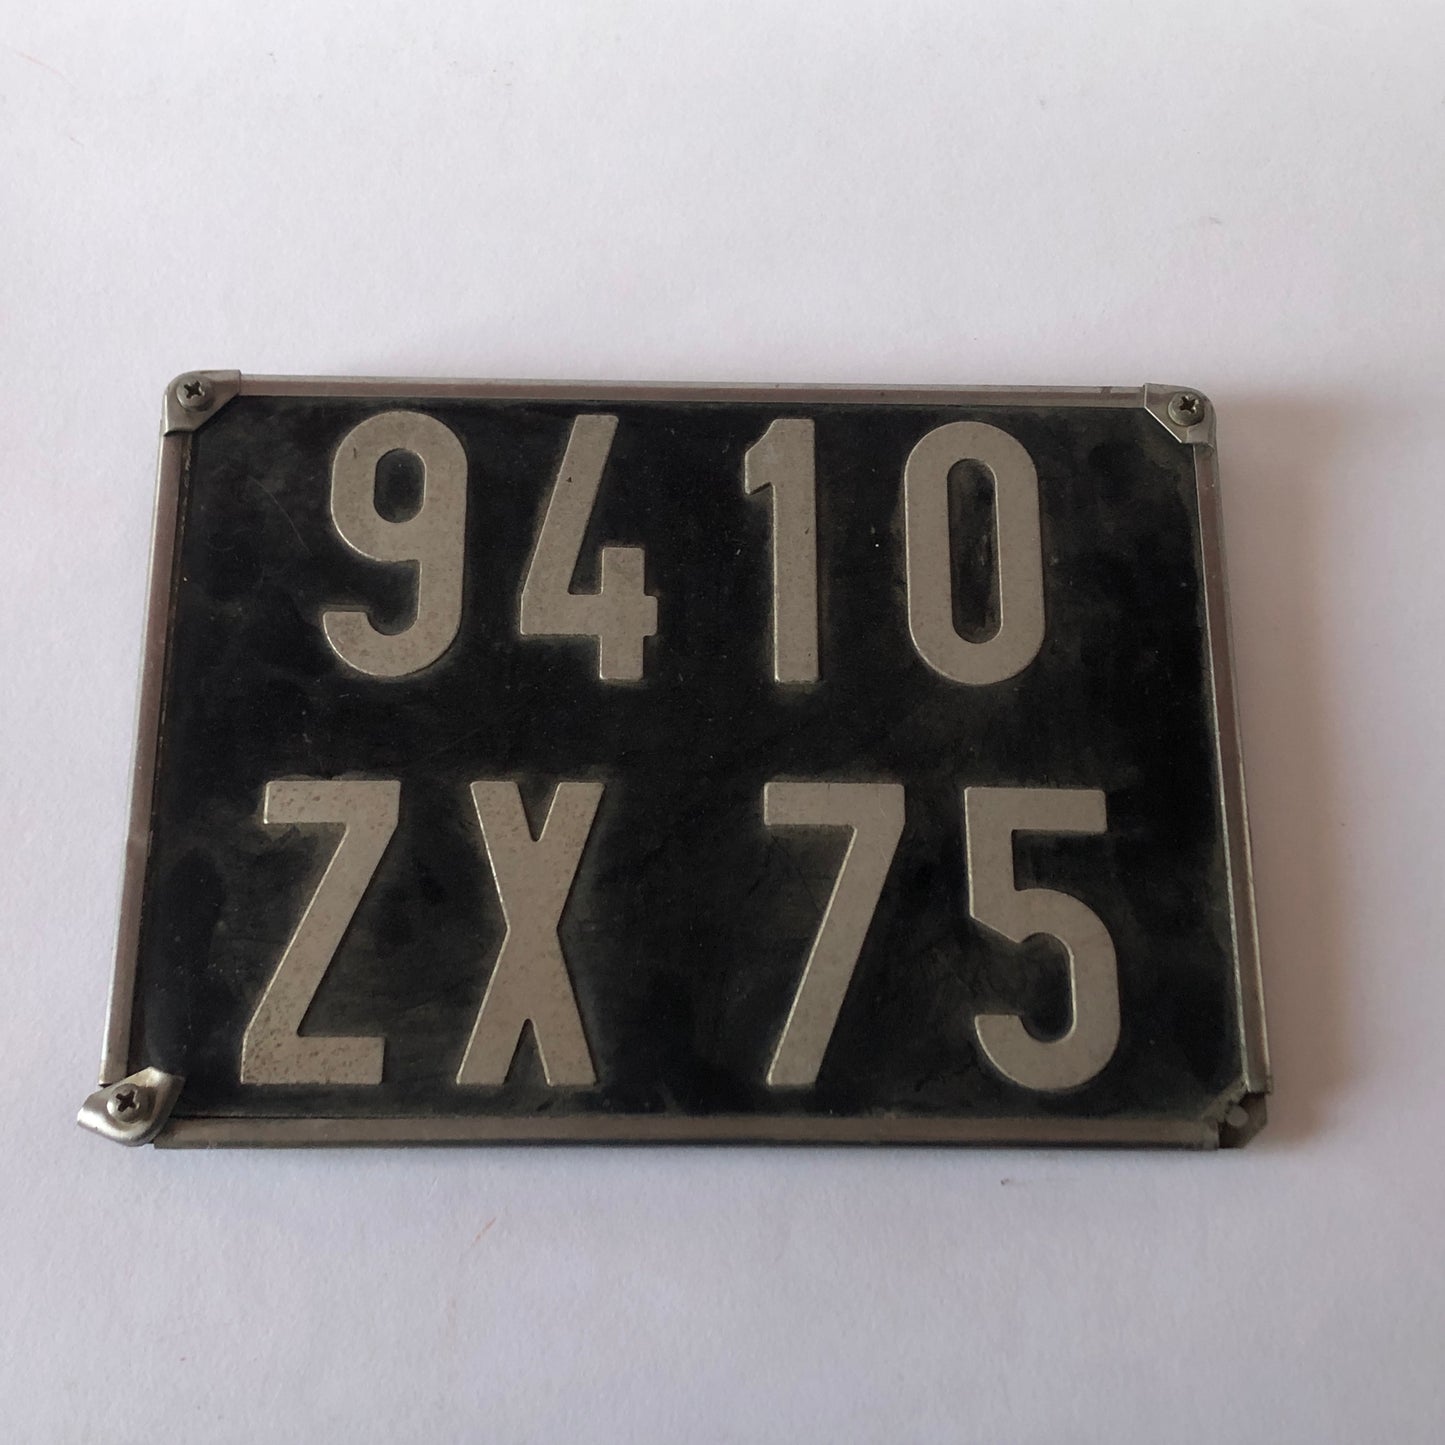 Automobilia, French plates from the 70s for collectors' use